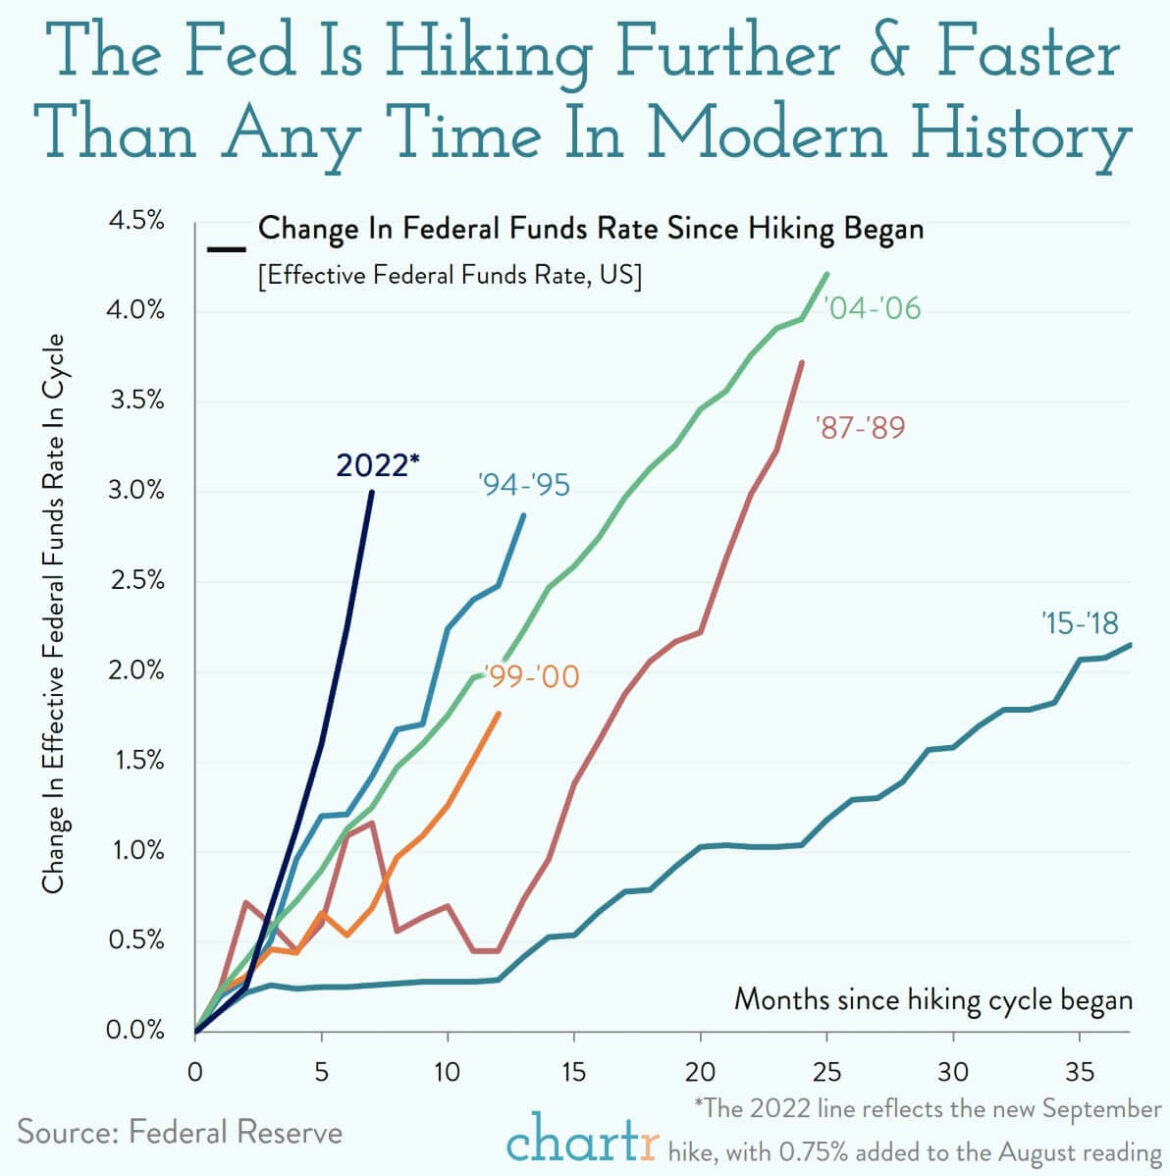 Federal Reserve rate hikes